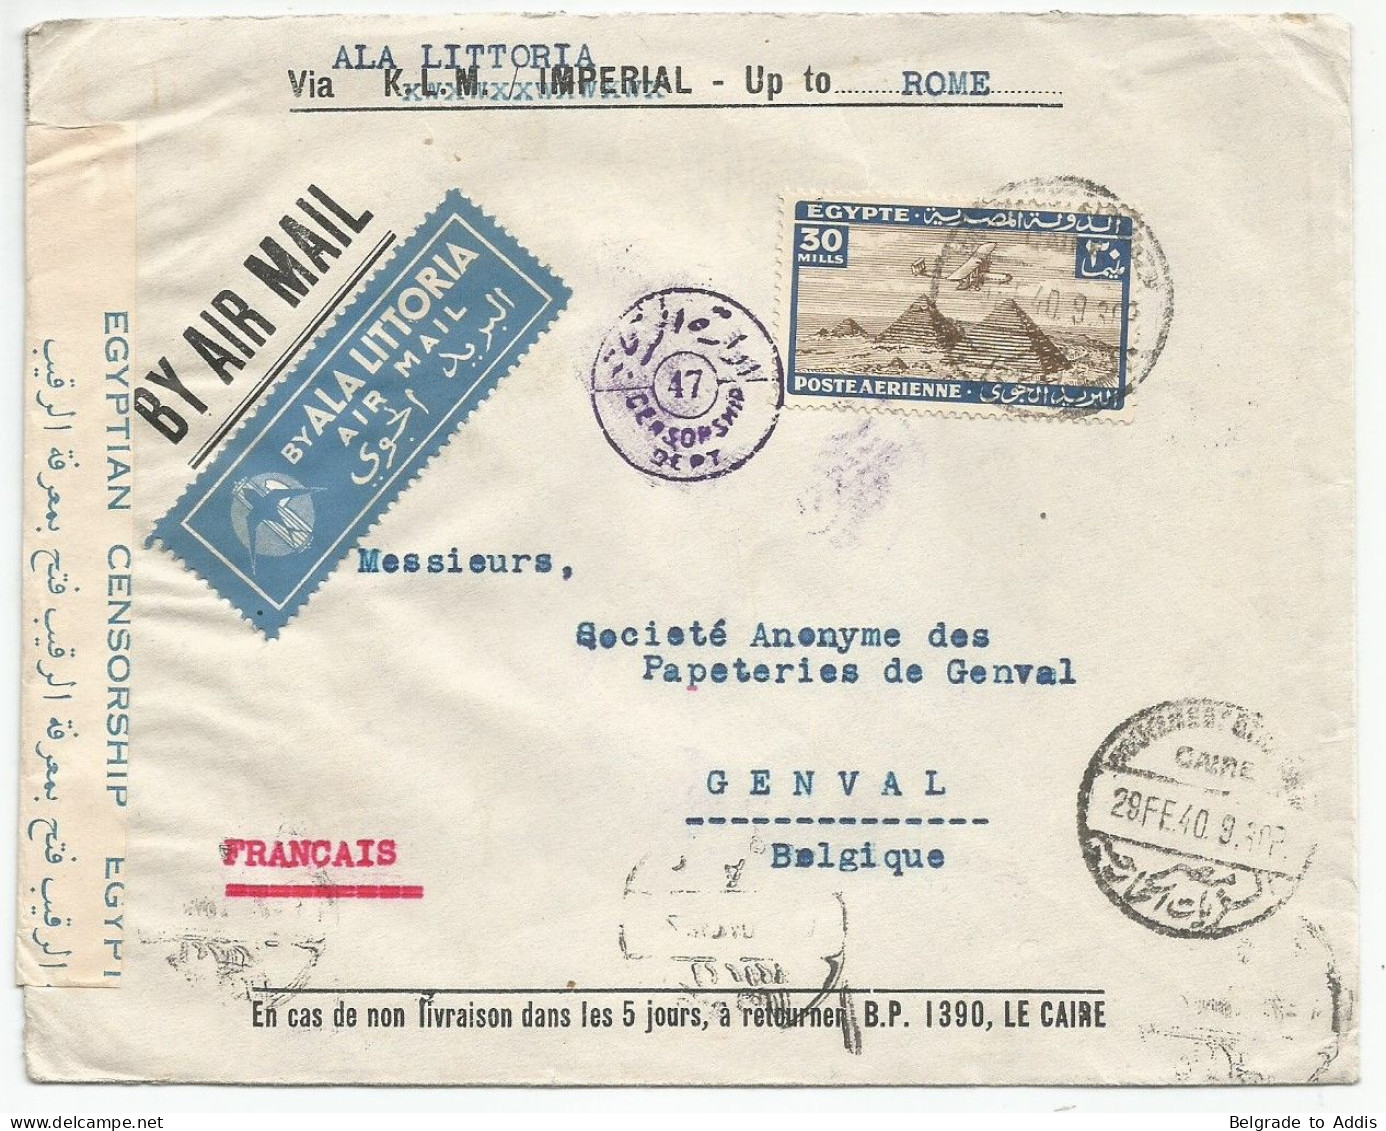 Egypt Air Mail Censored Cover Sent By ALA LITTORIA Via Roma Italy To Belgium 1940 - Aéreo